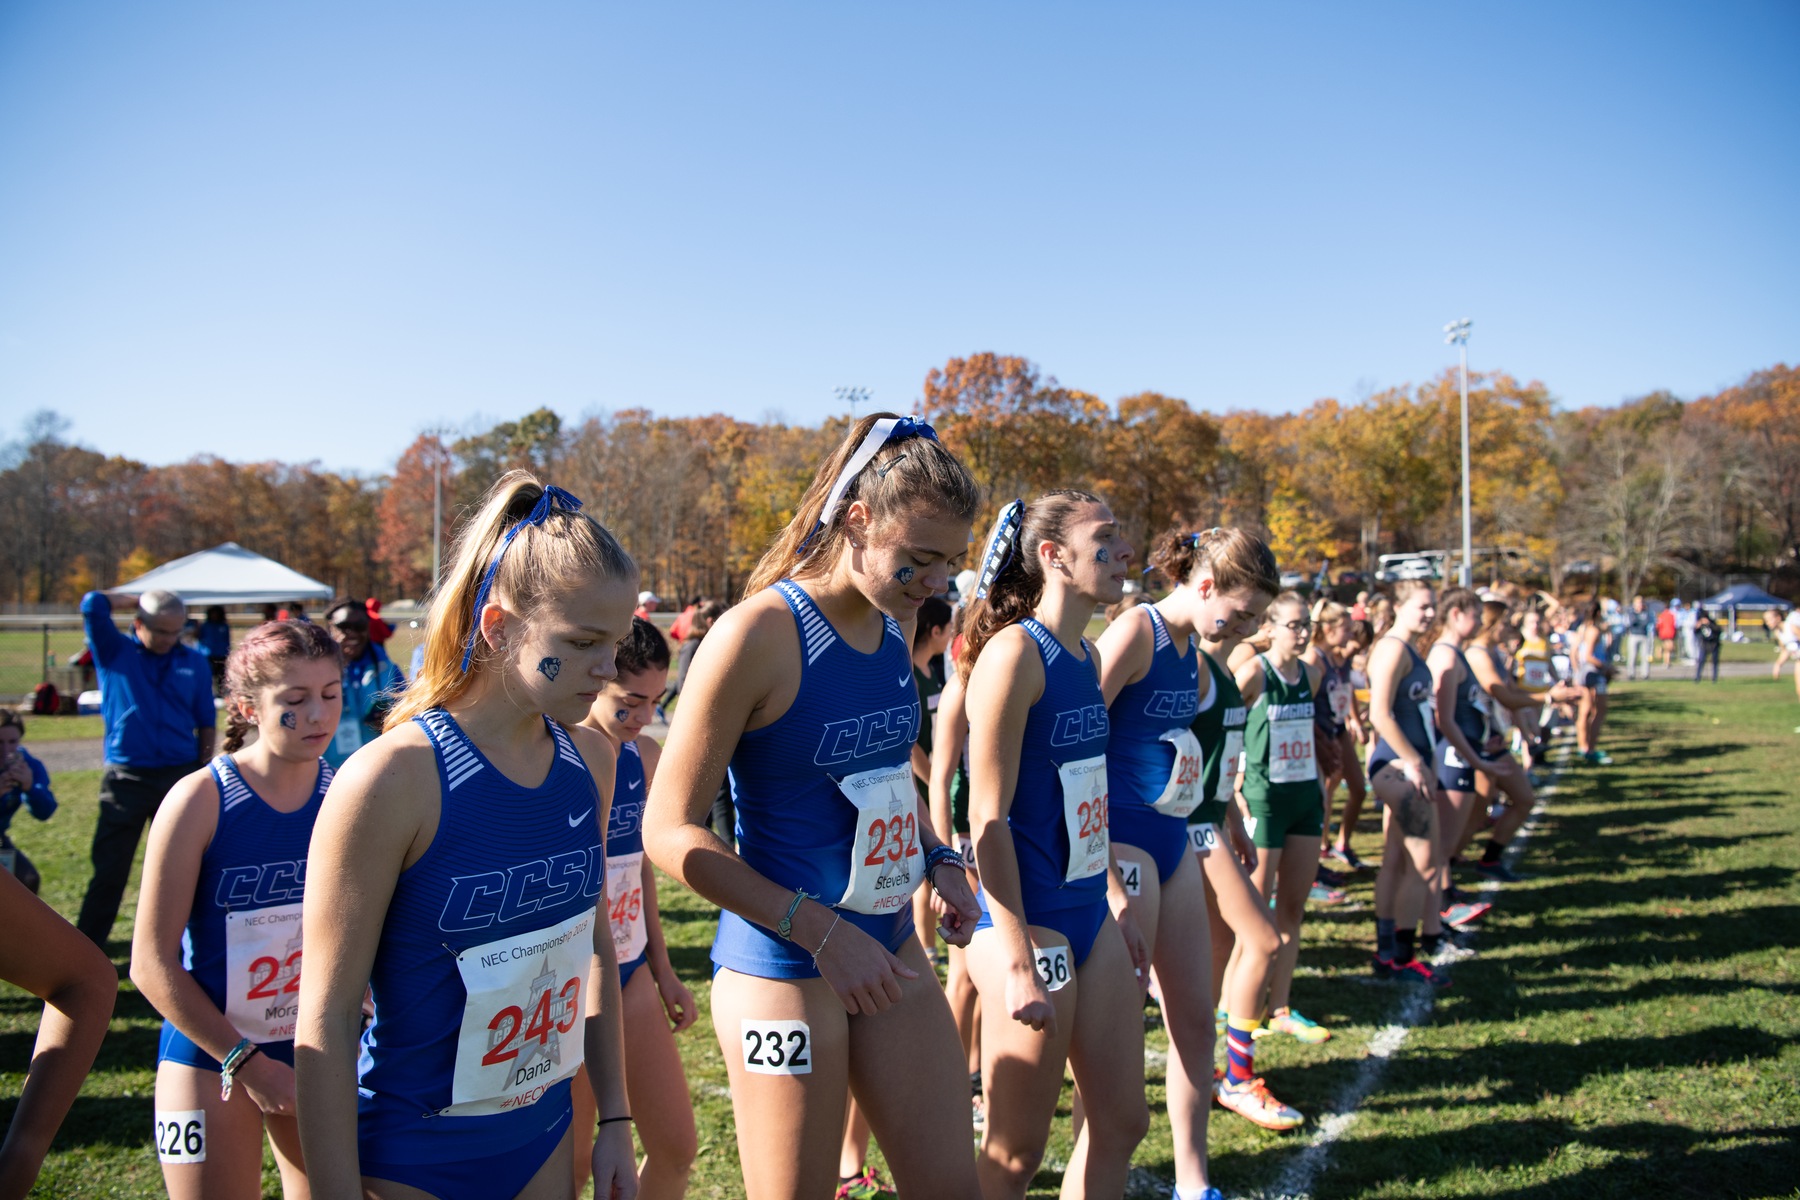 14 th Annual Ray and Robin Crothers Cross Country Challenge Set For Campus Race September 25